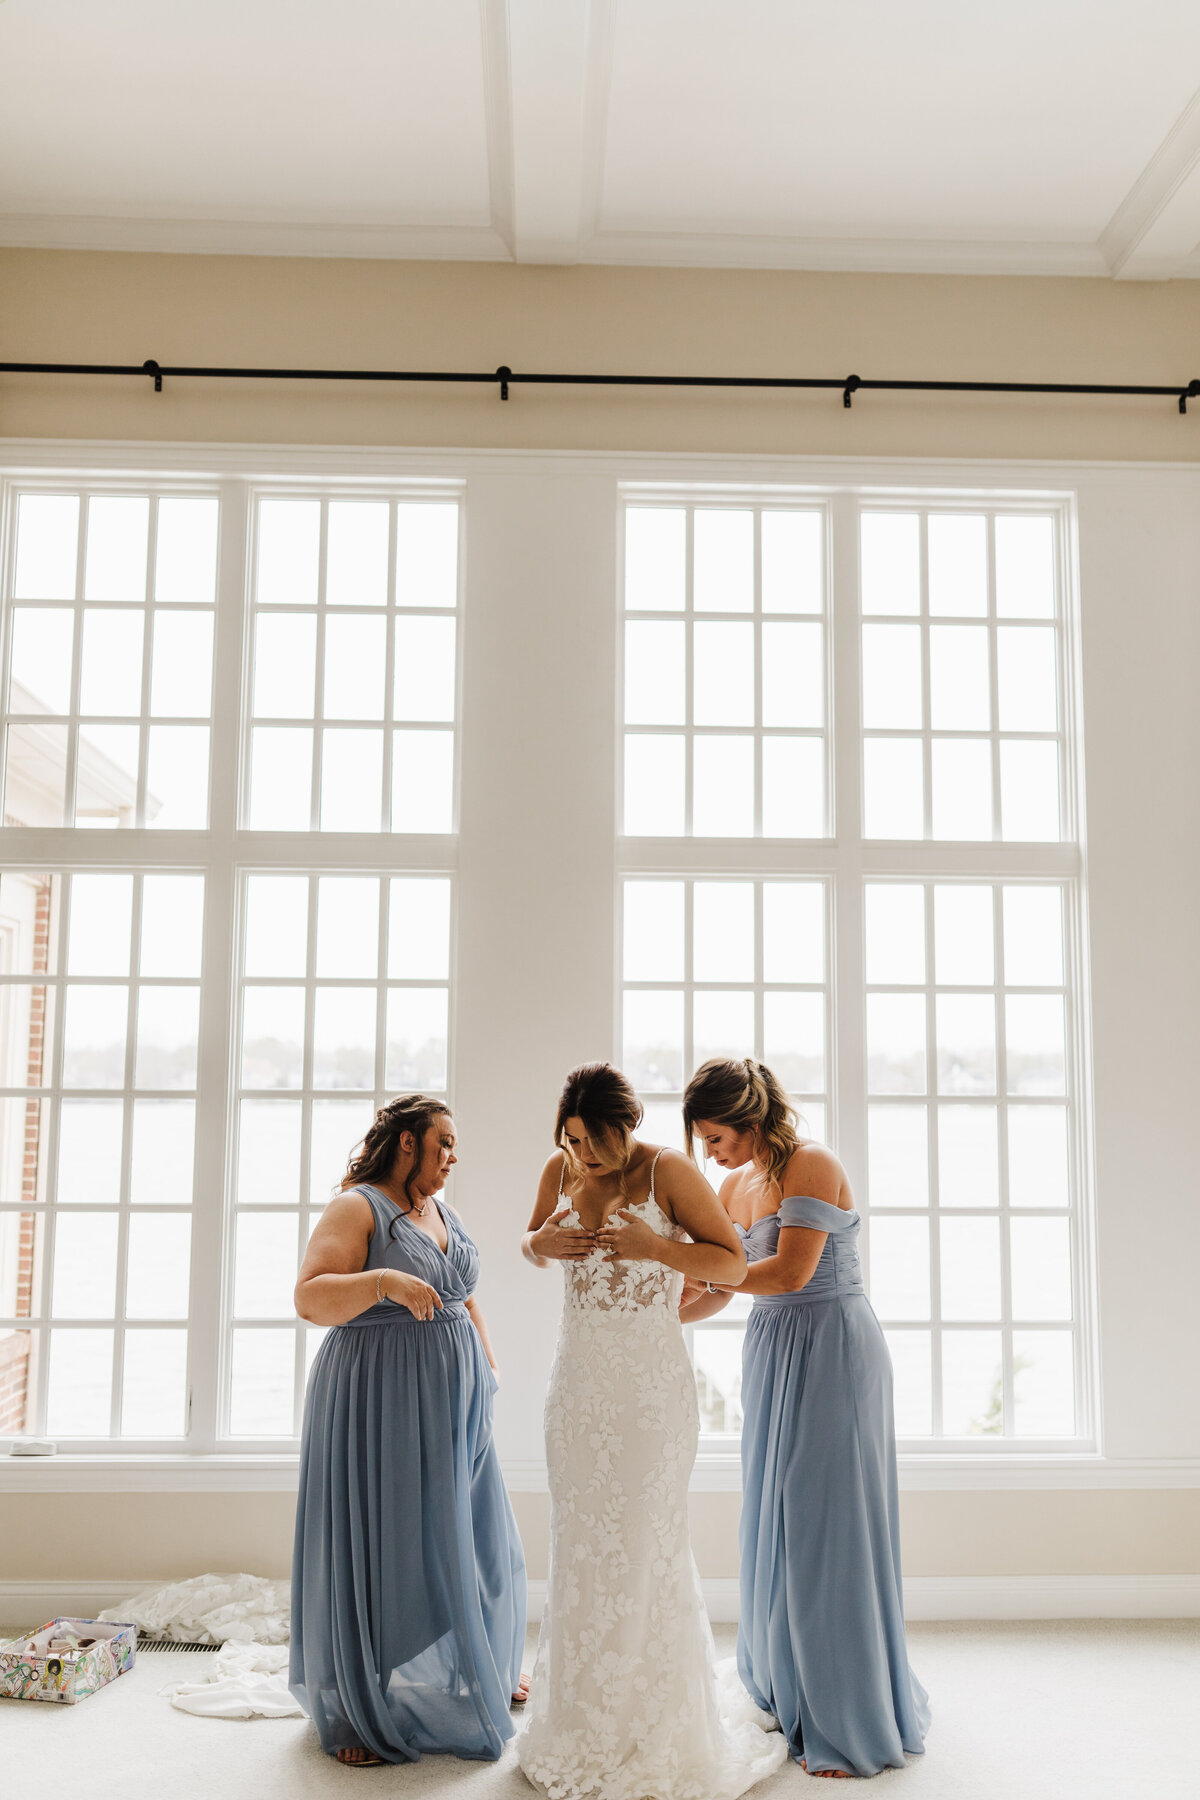 Bride getting help into her dress by bridesmaids